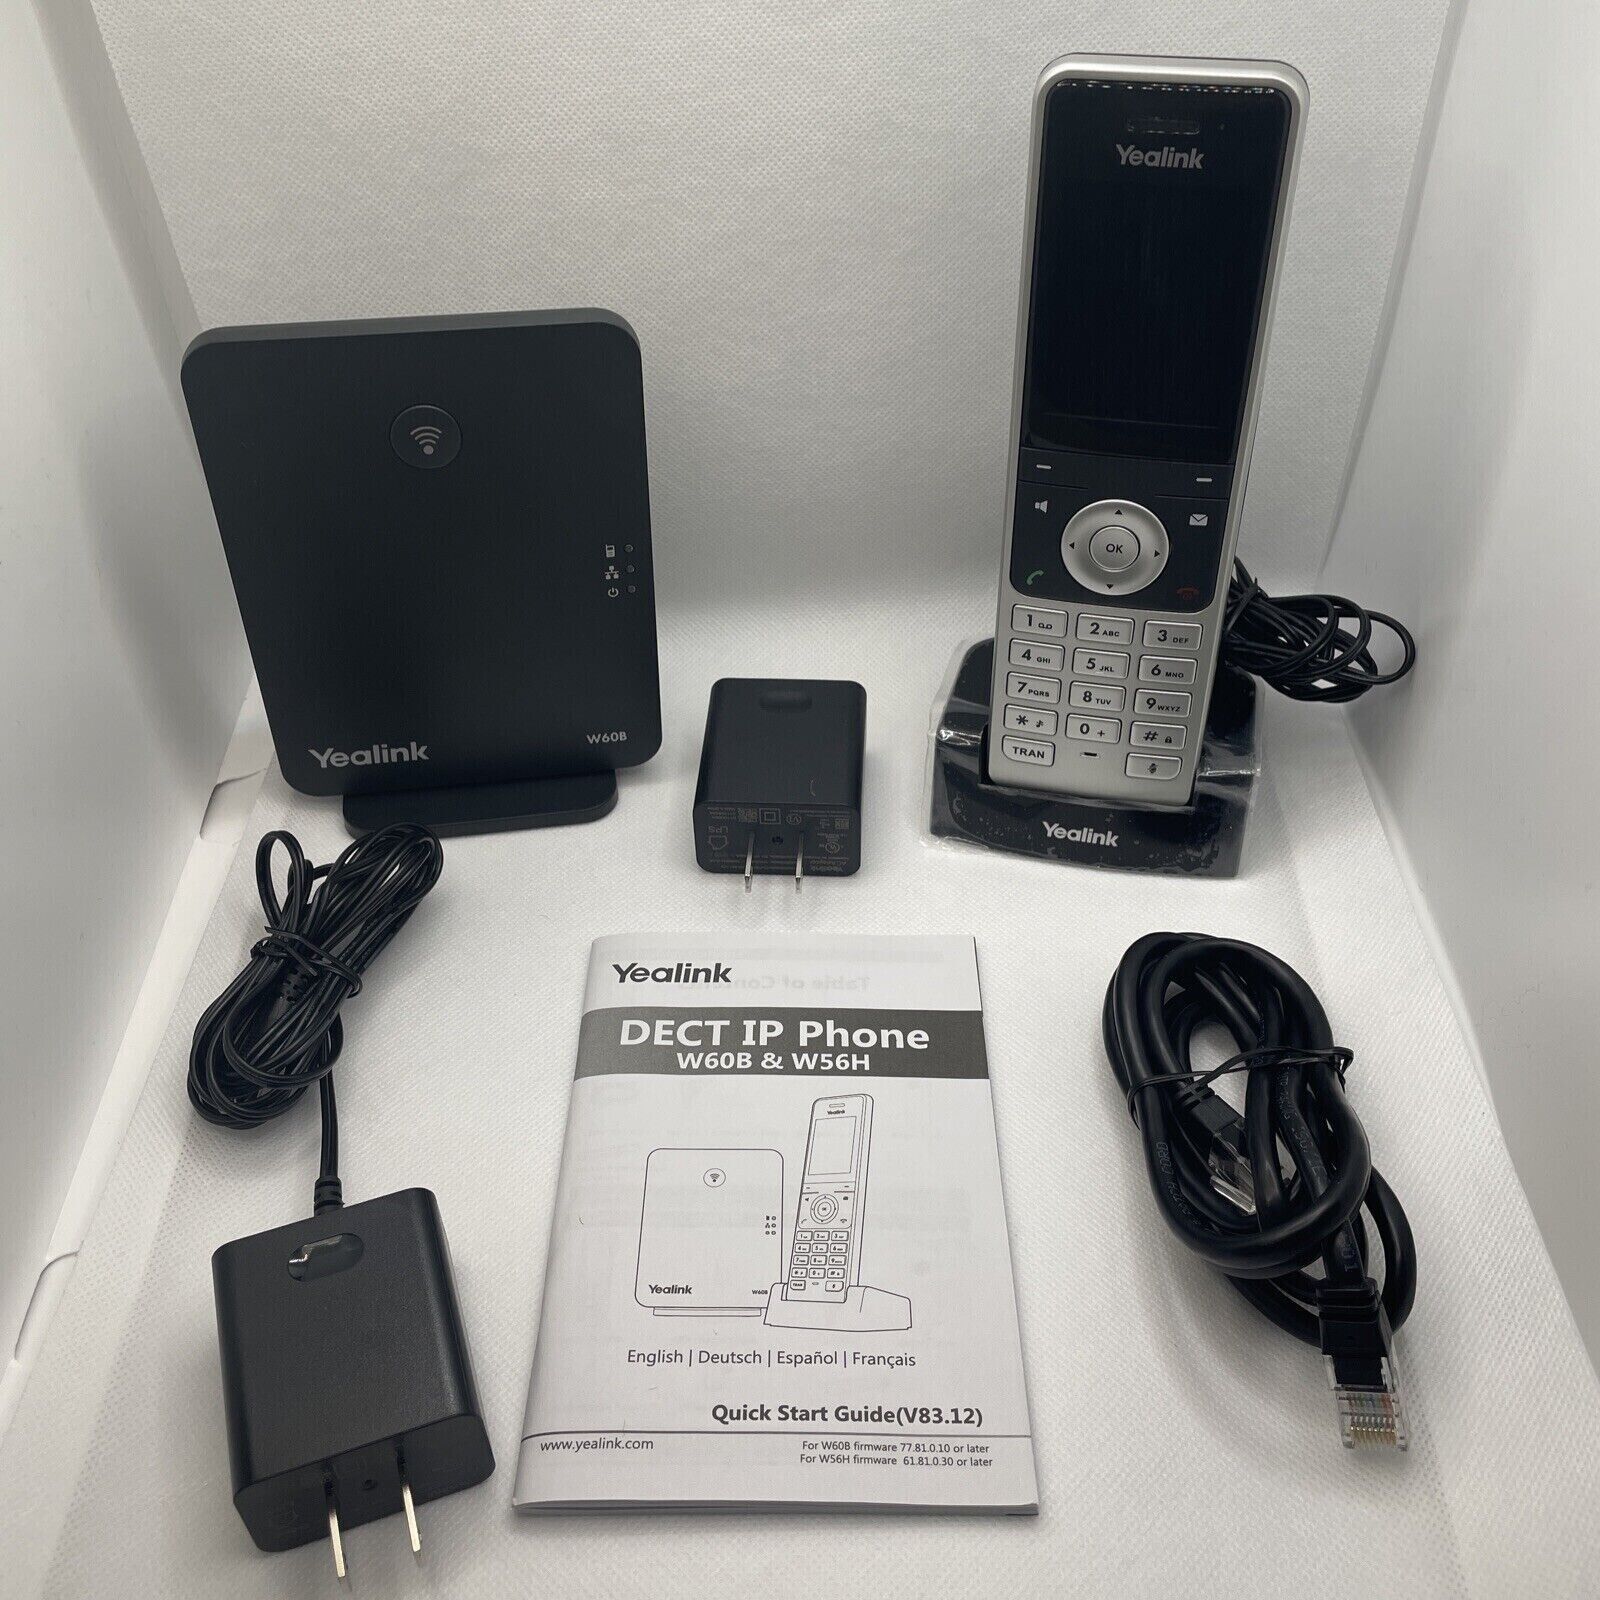 Yealink IP DECT Phone W60B - Cordless Phone With Basestation W56h